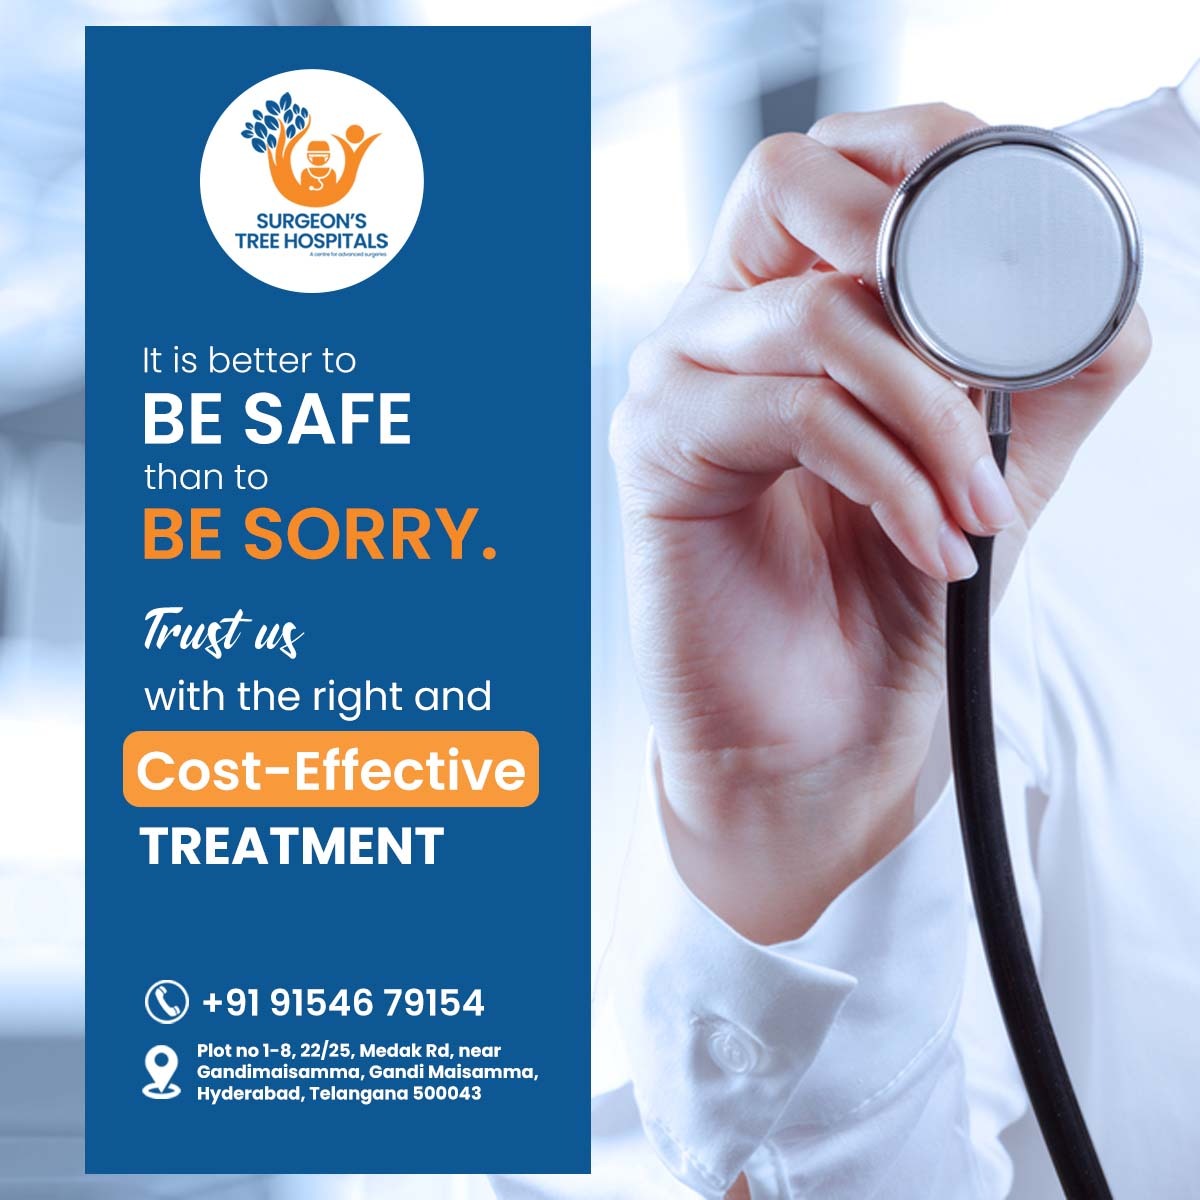 Your health is our priority and we offer quality healthcare for you.
.
 #surgeon #varicocele #medical #appendectomy #cholecystectomy #laparoscopiccholecystectomy #fistula #lasersurgery #laproscopicsurgery #Hysterectomy #hernia #Piles #surgicalservices #emergencyservices #24/7